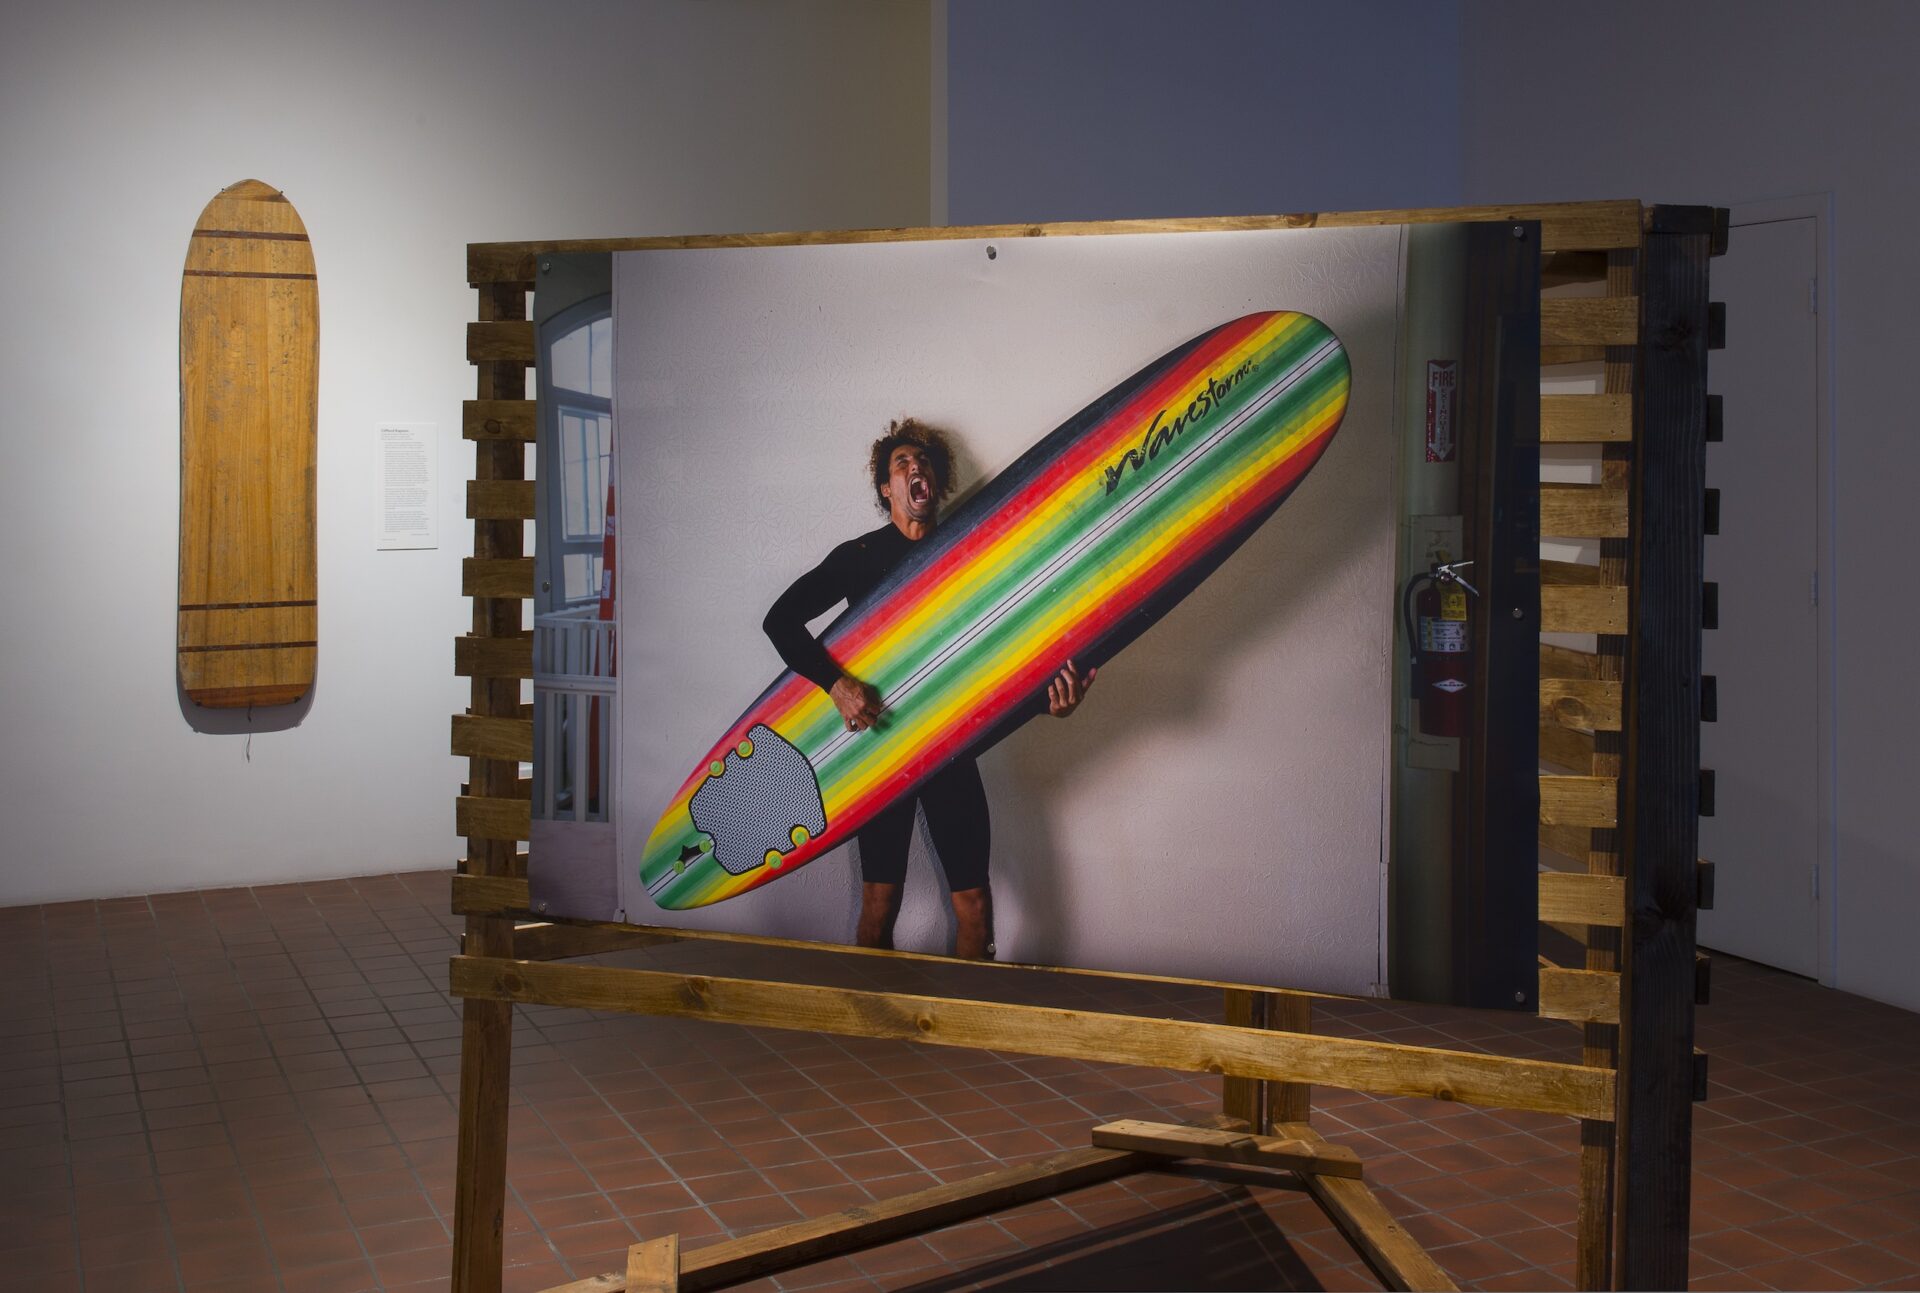 A photo of a man holding a colorful surfboard on an easel.